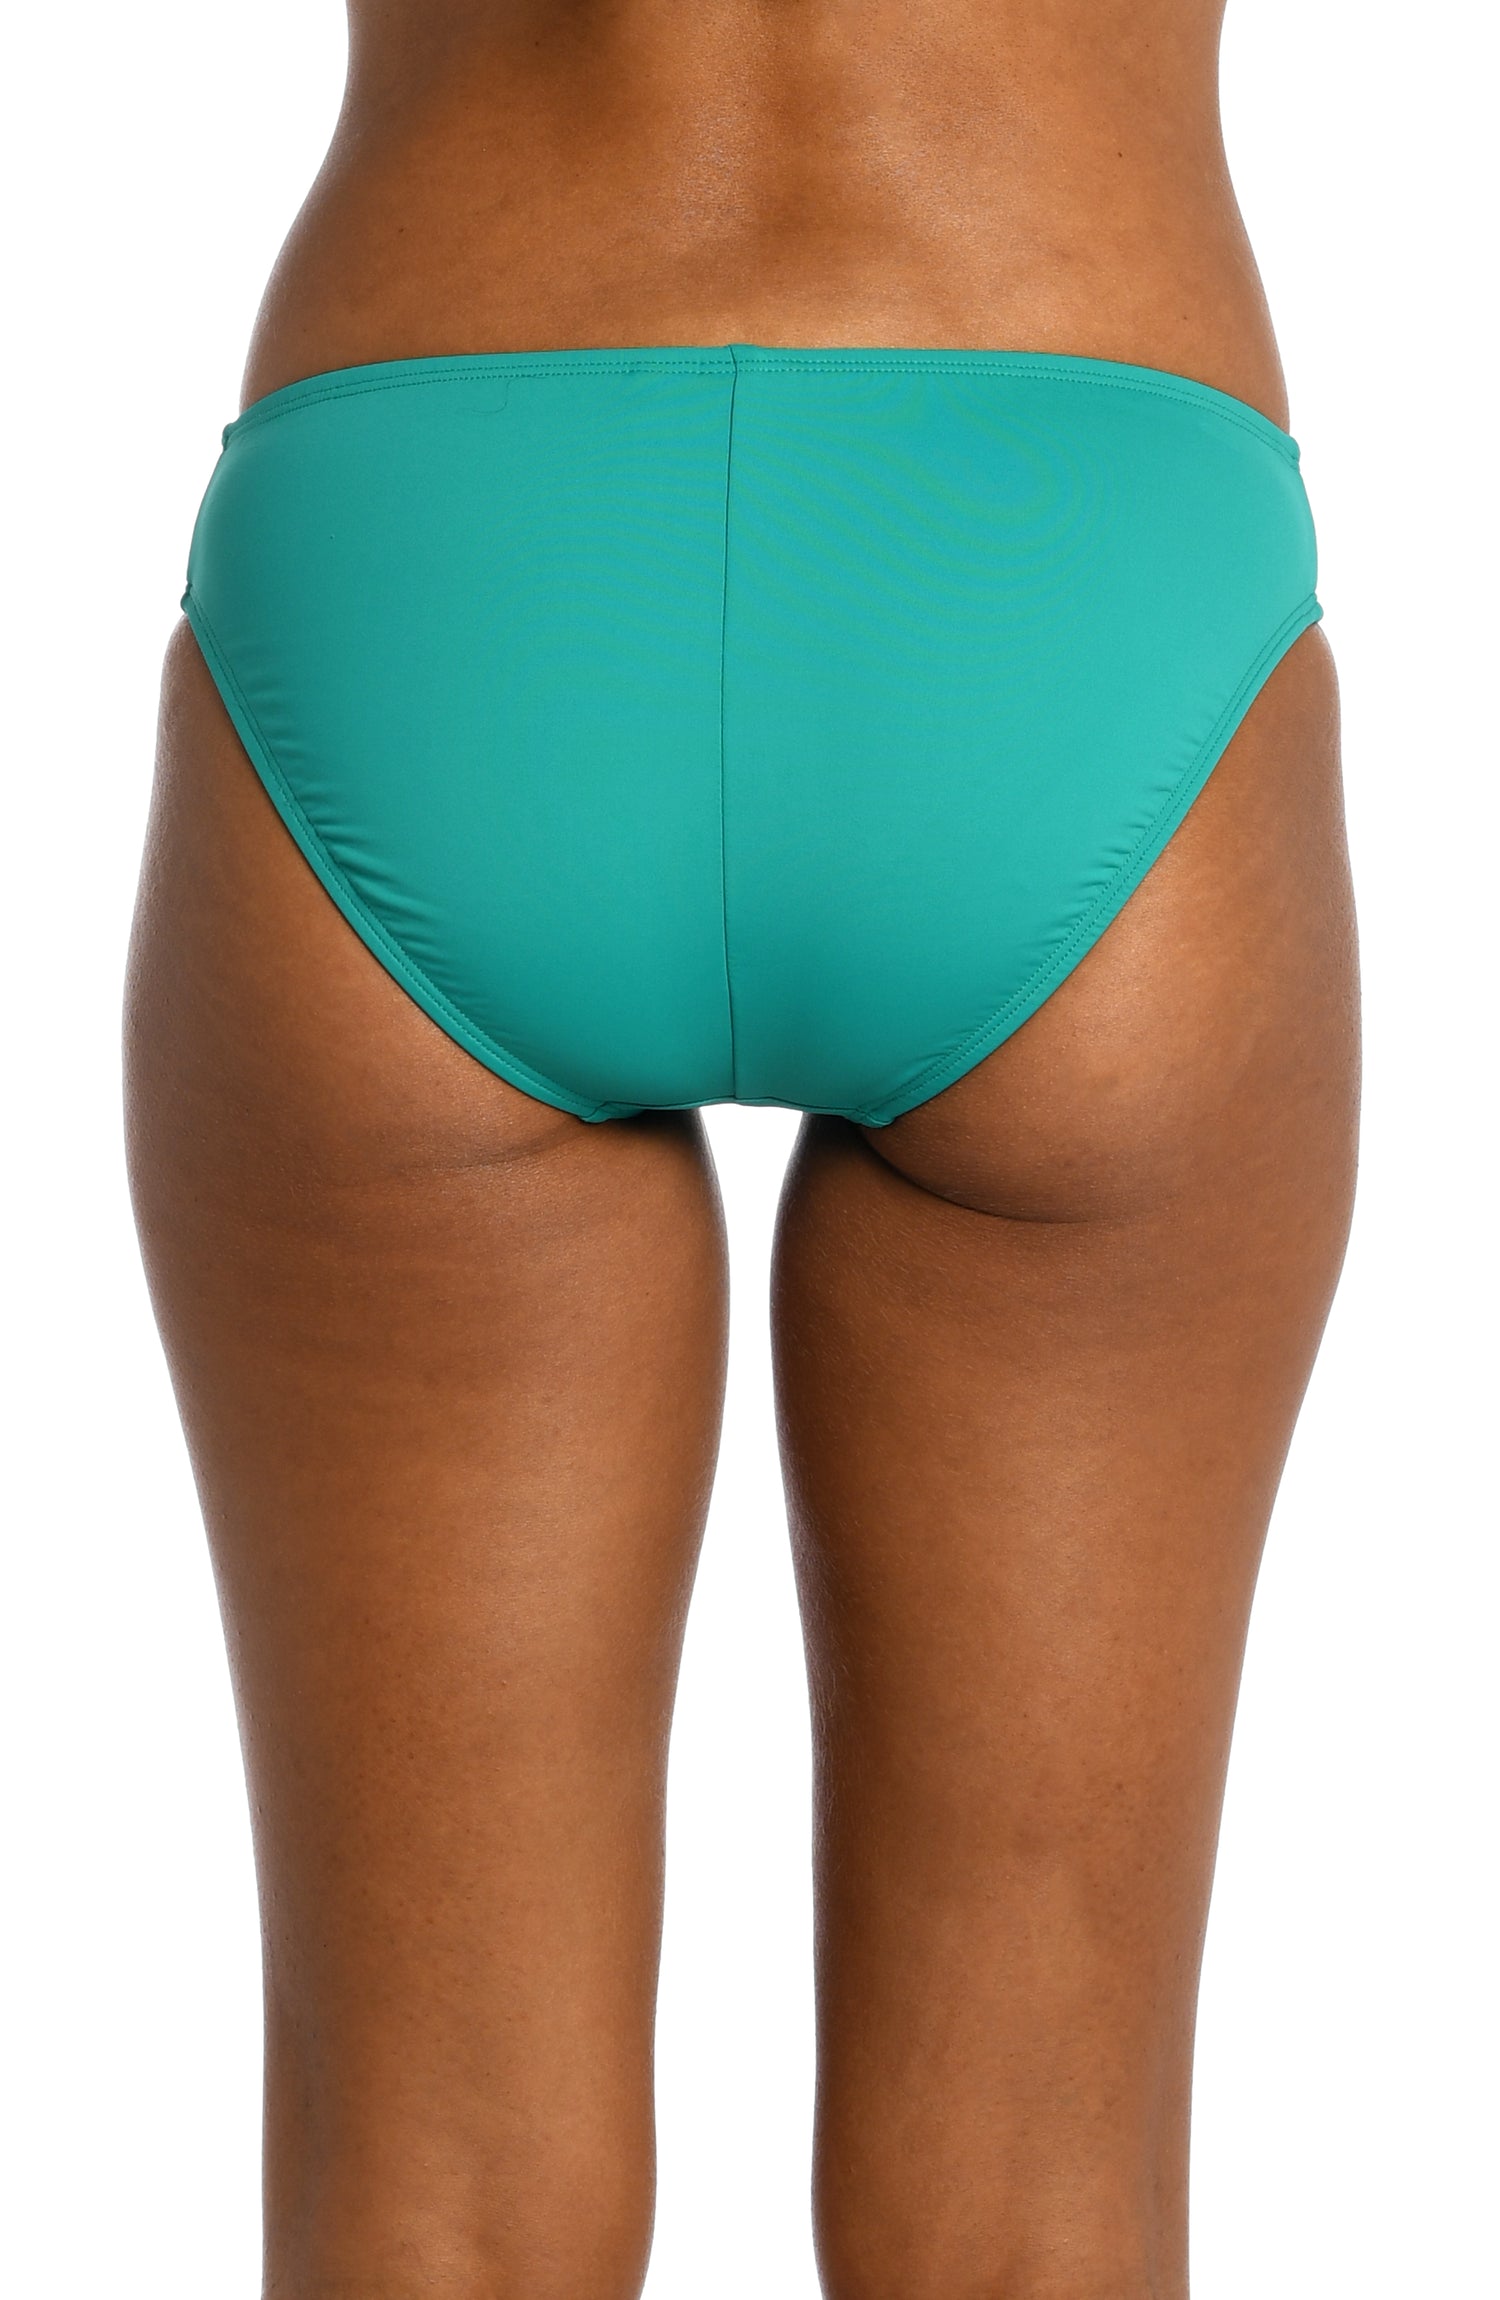 Model is wearing a emerald colored hipster swimsuit bottom from our Best-Selling Island Goddess collection.